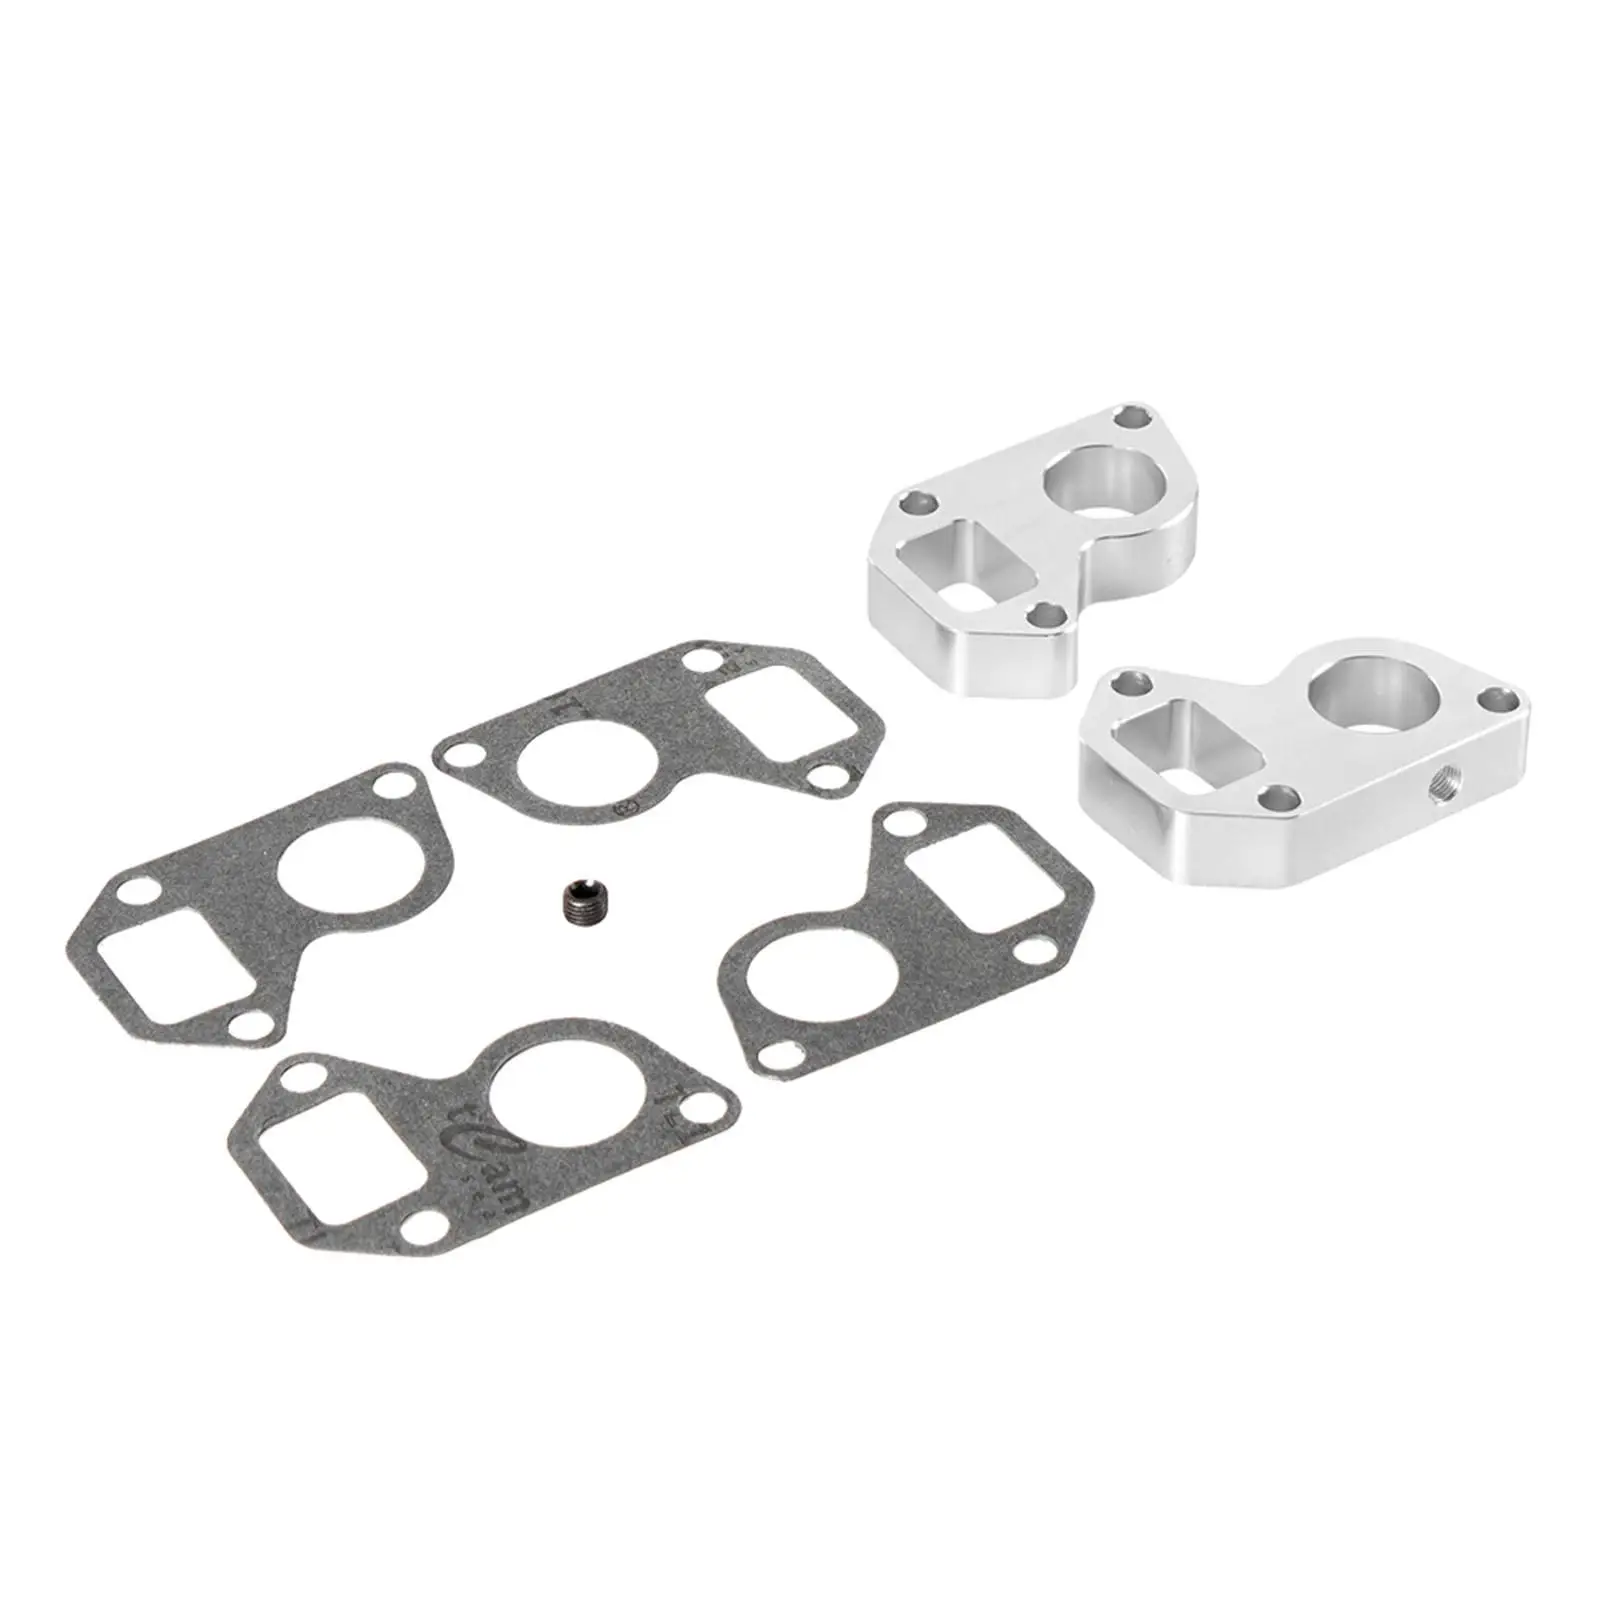 1 Set Water Pump Spacers Adapter Fit for LS Spare Parts Replace